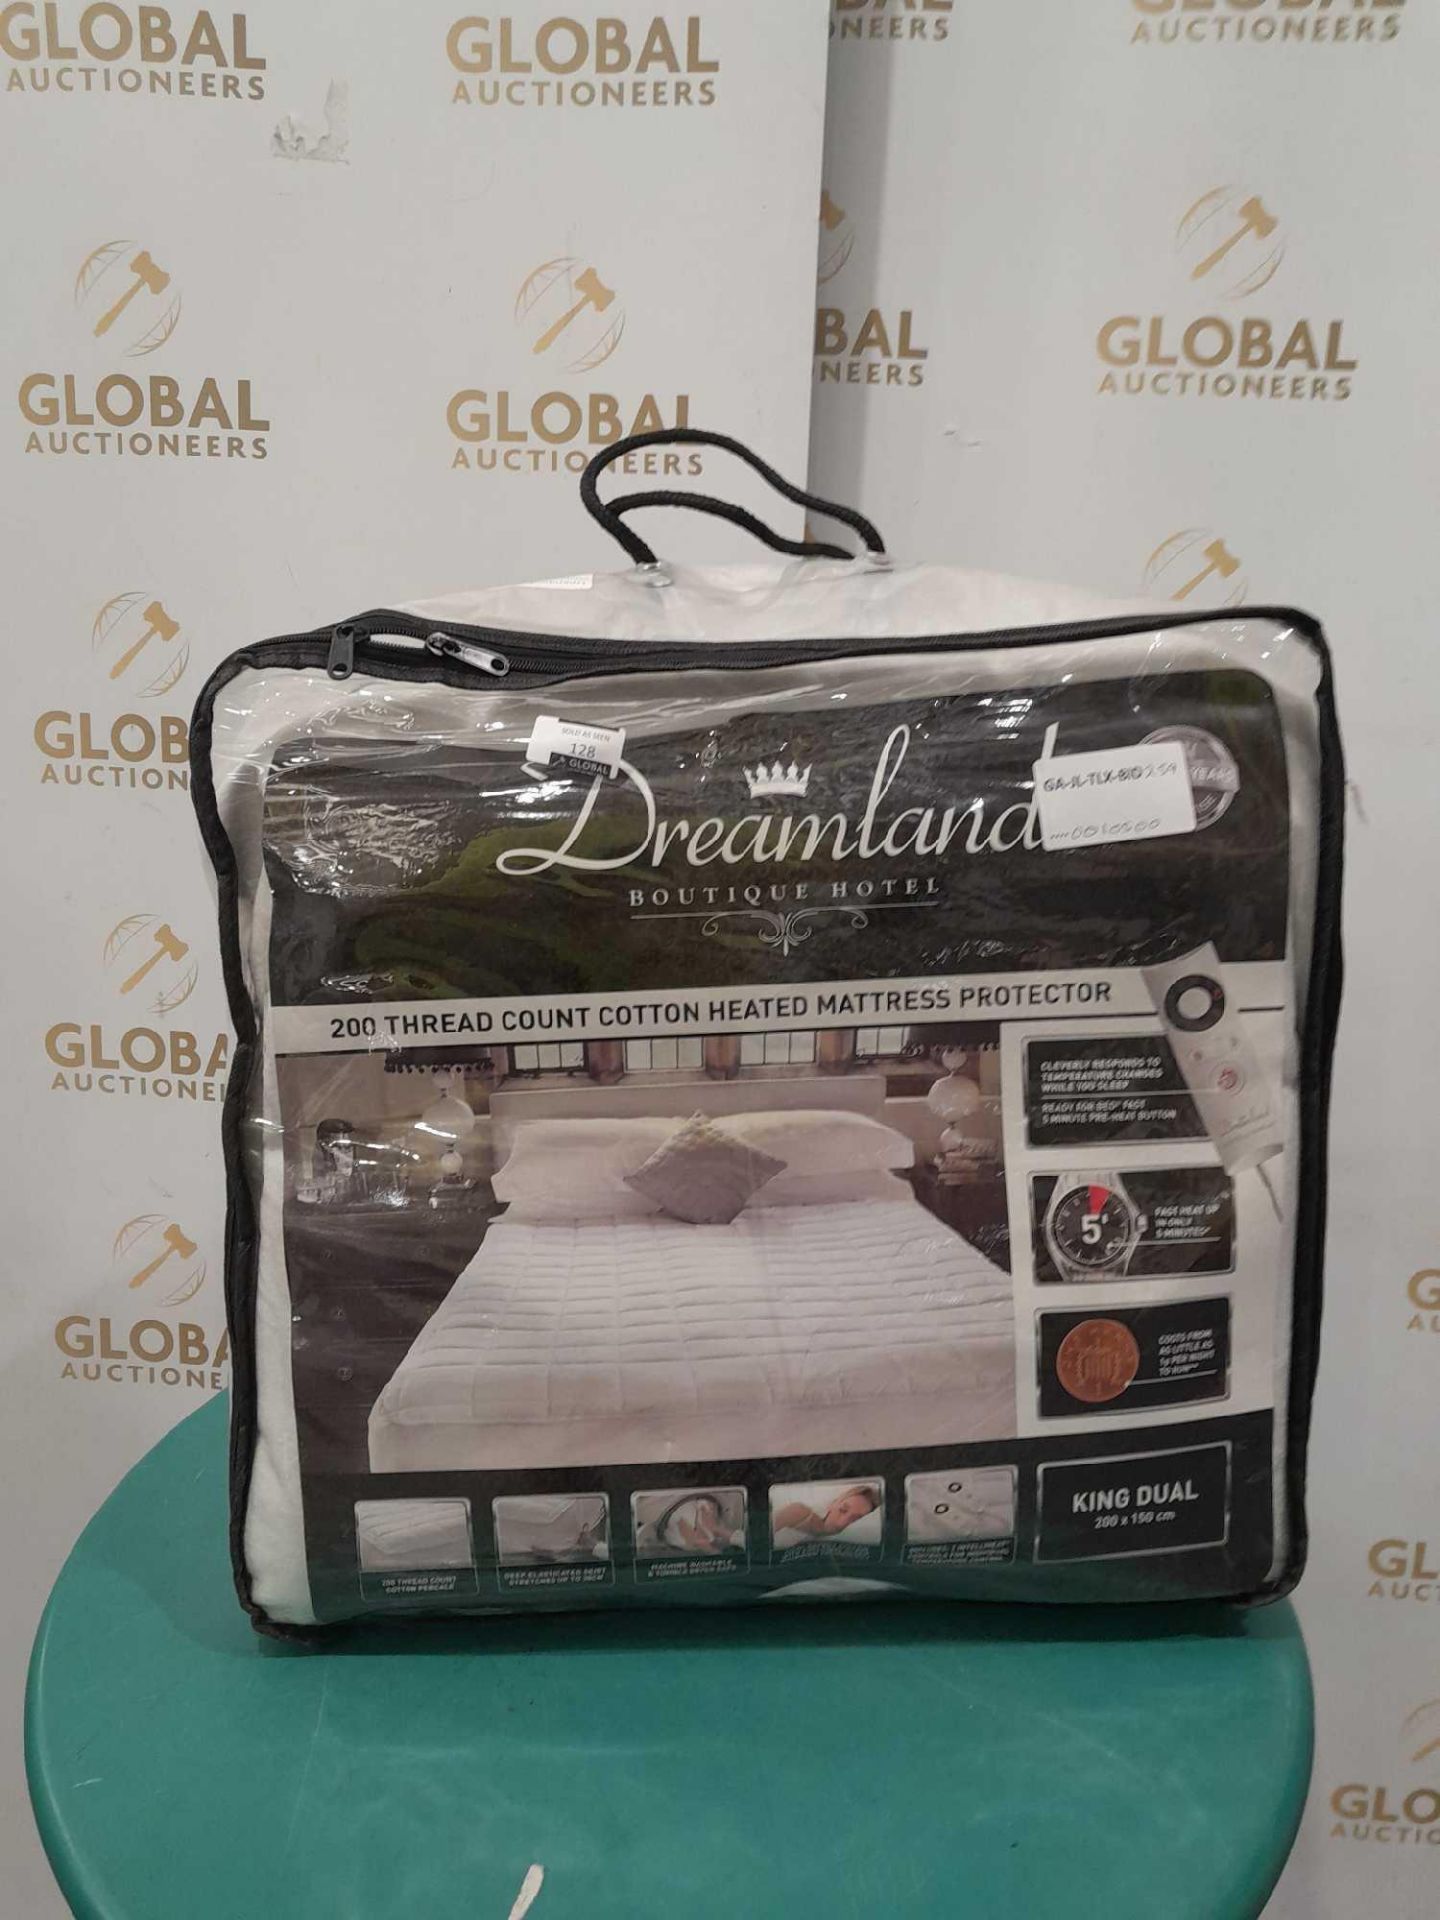 RRP £105 Bagged Dreamland 200 Thread Count Cotton Heated Mattress Protector - Image 2 of 2